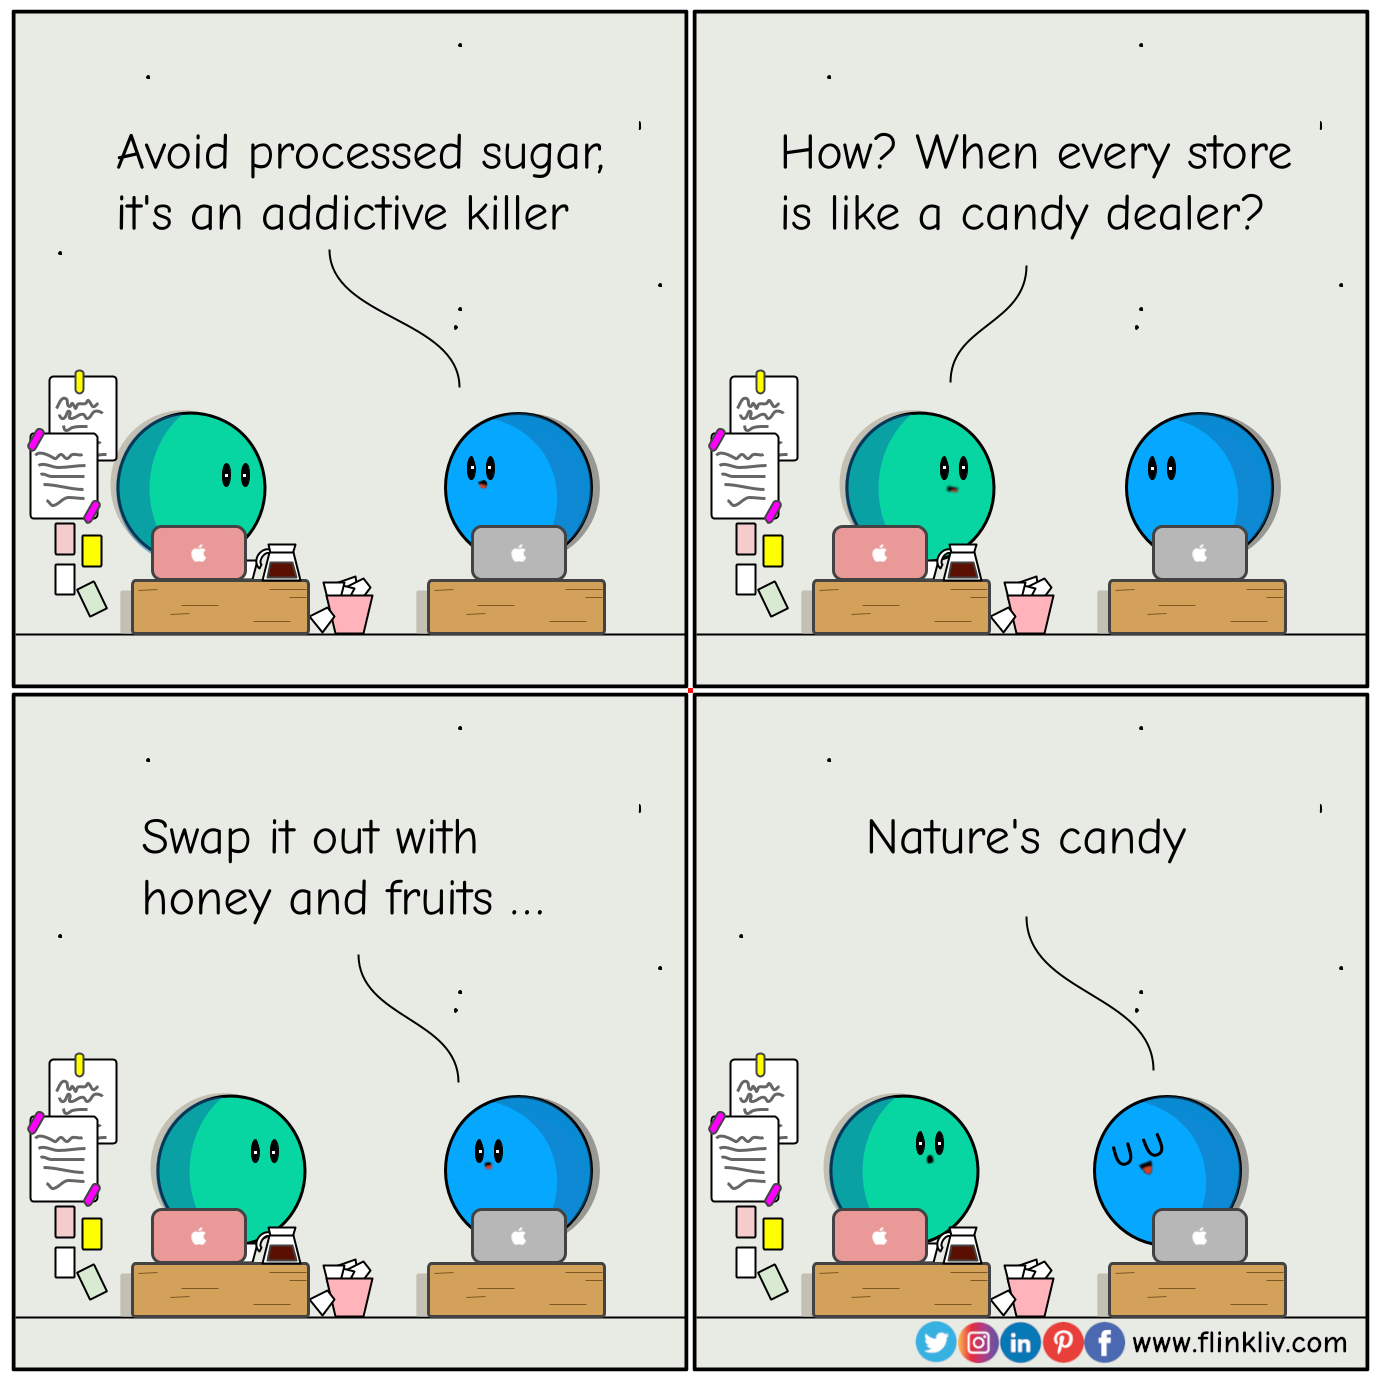 Conversation between A and B about how the processed sugar is the addictive killer     
				B: Watch out! Sugar's the addictive killer 
				A: How? when every store is like a candy dealer?
				B: swap it out with honey and fruits
				B: Nature's candy

            
            
              